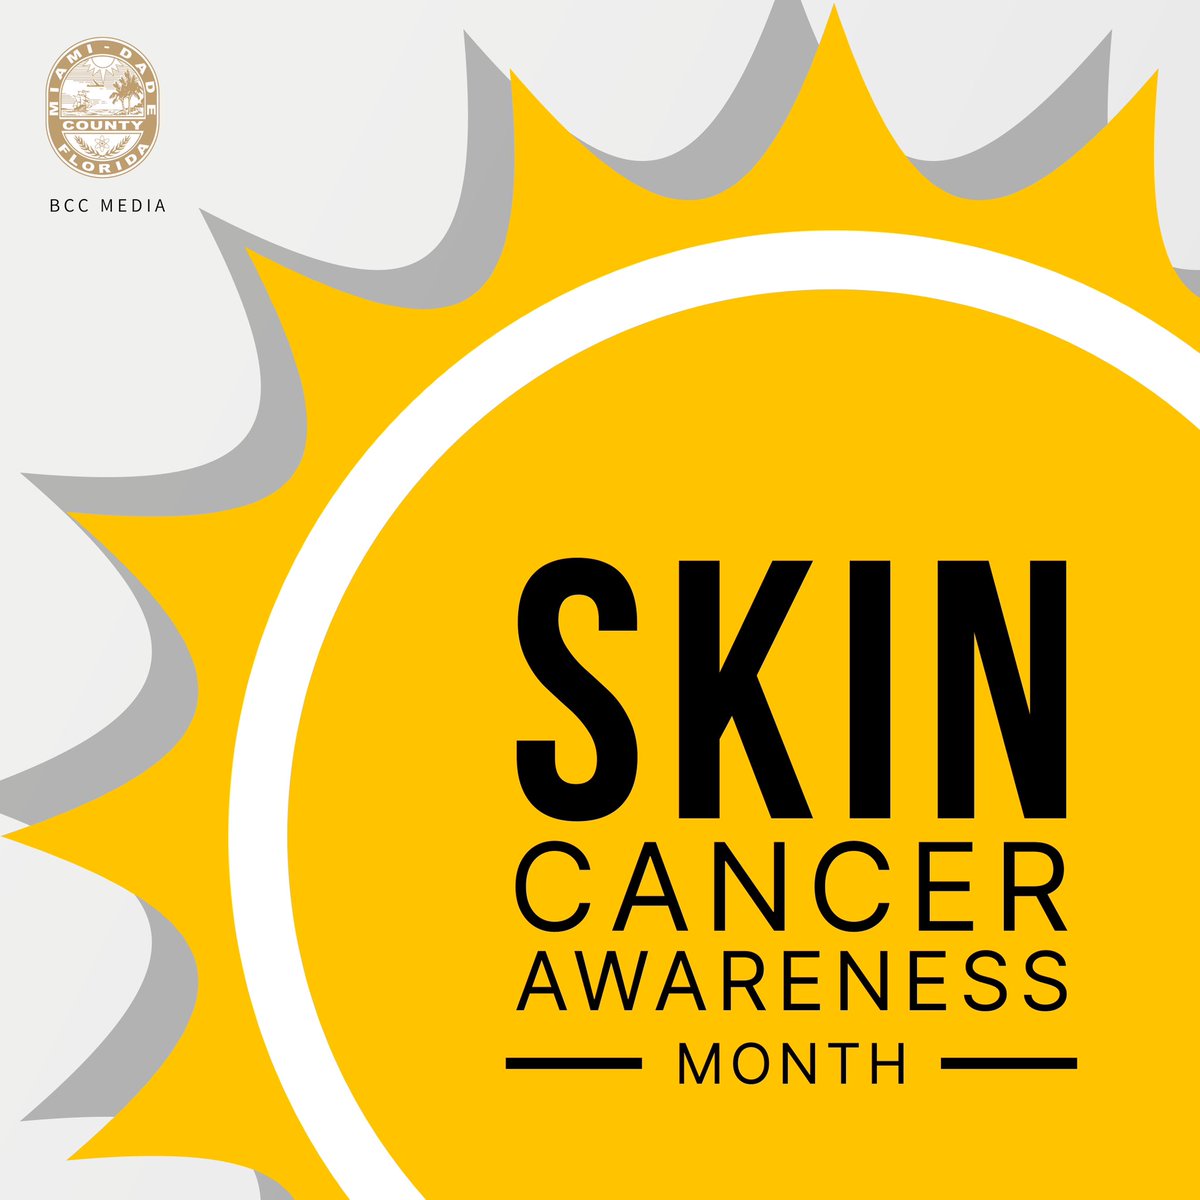 Our County declared May as Skin Cancer Awareness Month after a resolution sponsored by Commissioner @SenReneGarciaFL to encourage residents to learn more about the most common type of cancer, skin cancer, and ways to prevent it.